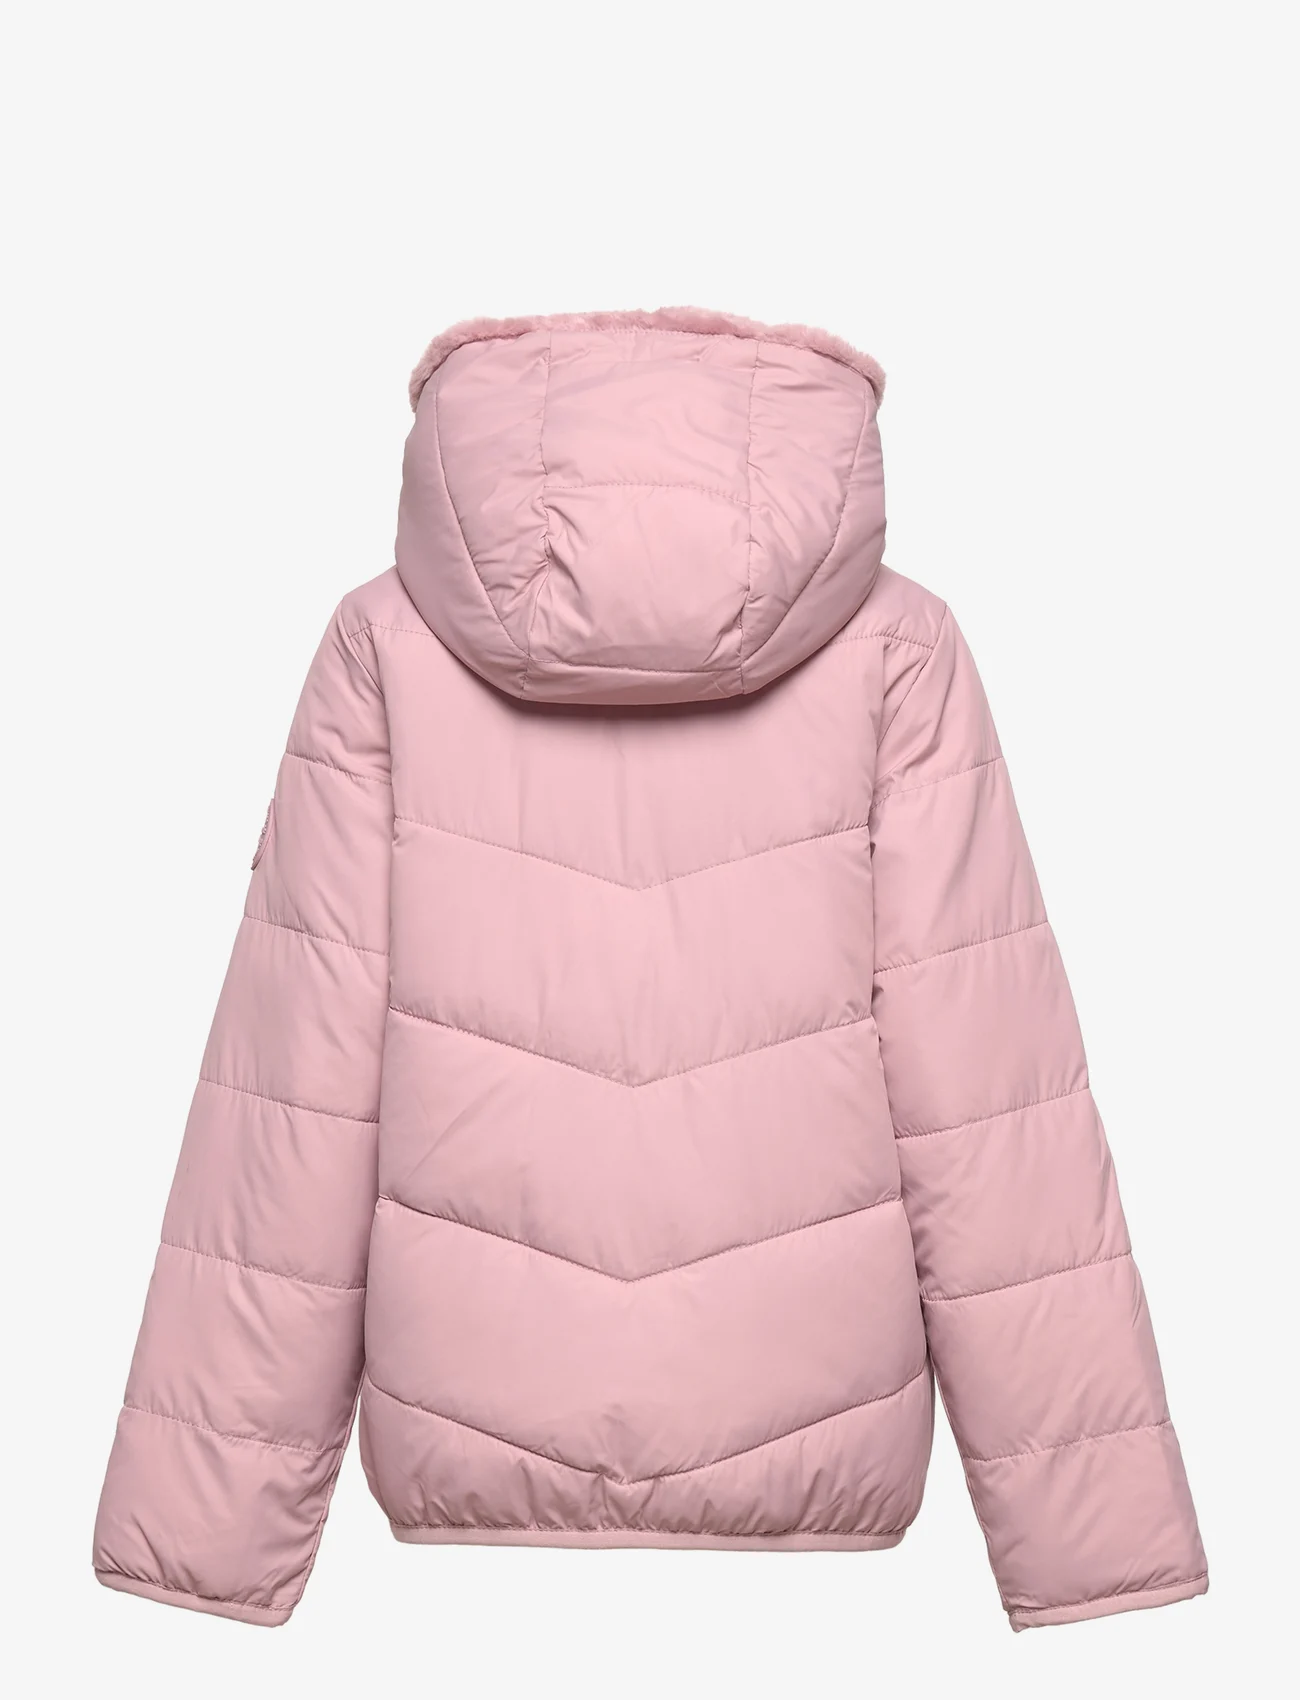 Abercrombie & Fitch - kids GIRLS OUTERWEAR - untuva- & toppatakit - pink - 1